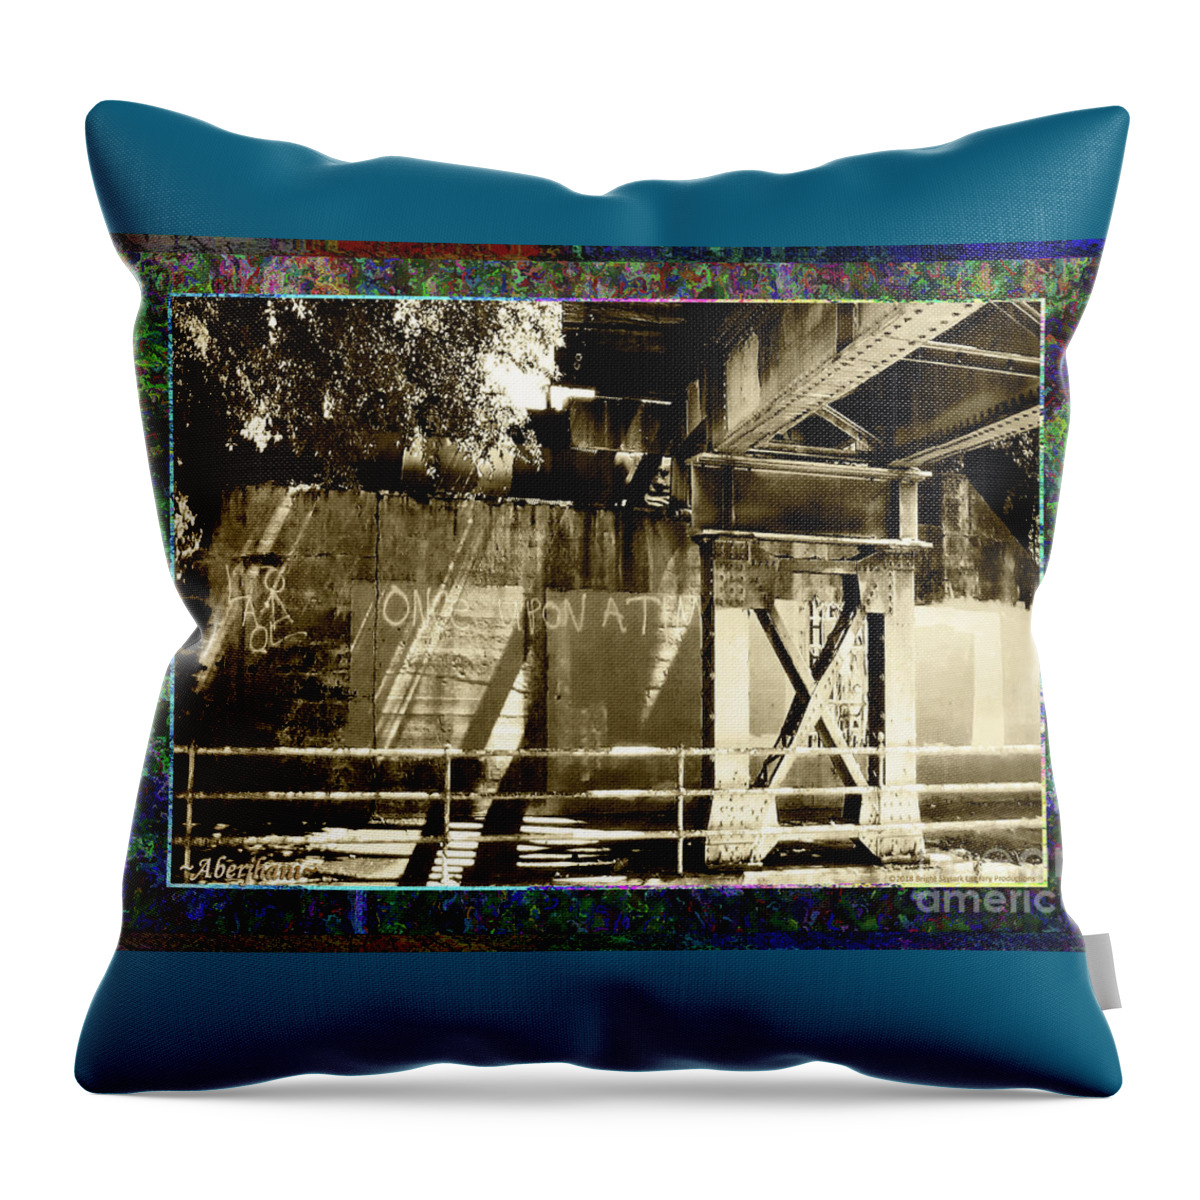 Historic America Throw Pillow featuring the photograph Henry Street Underpass Number 1 by Aberjhani